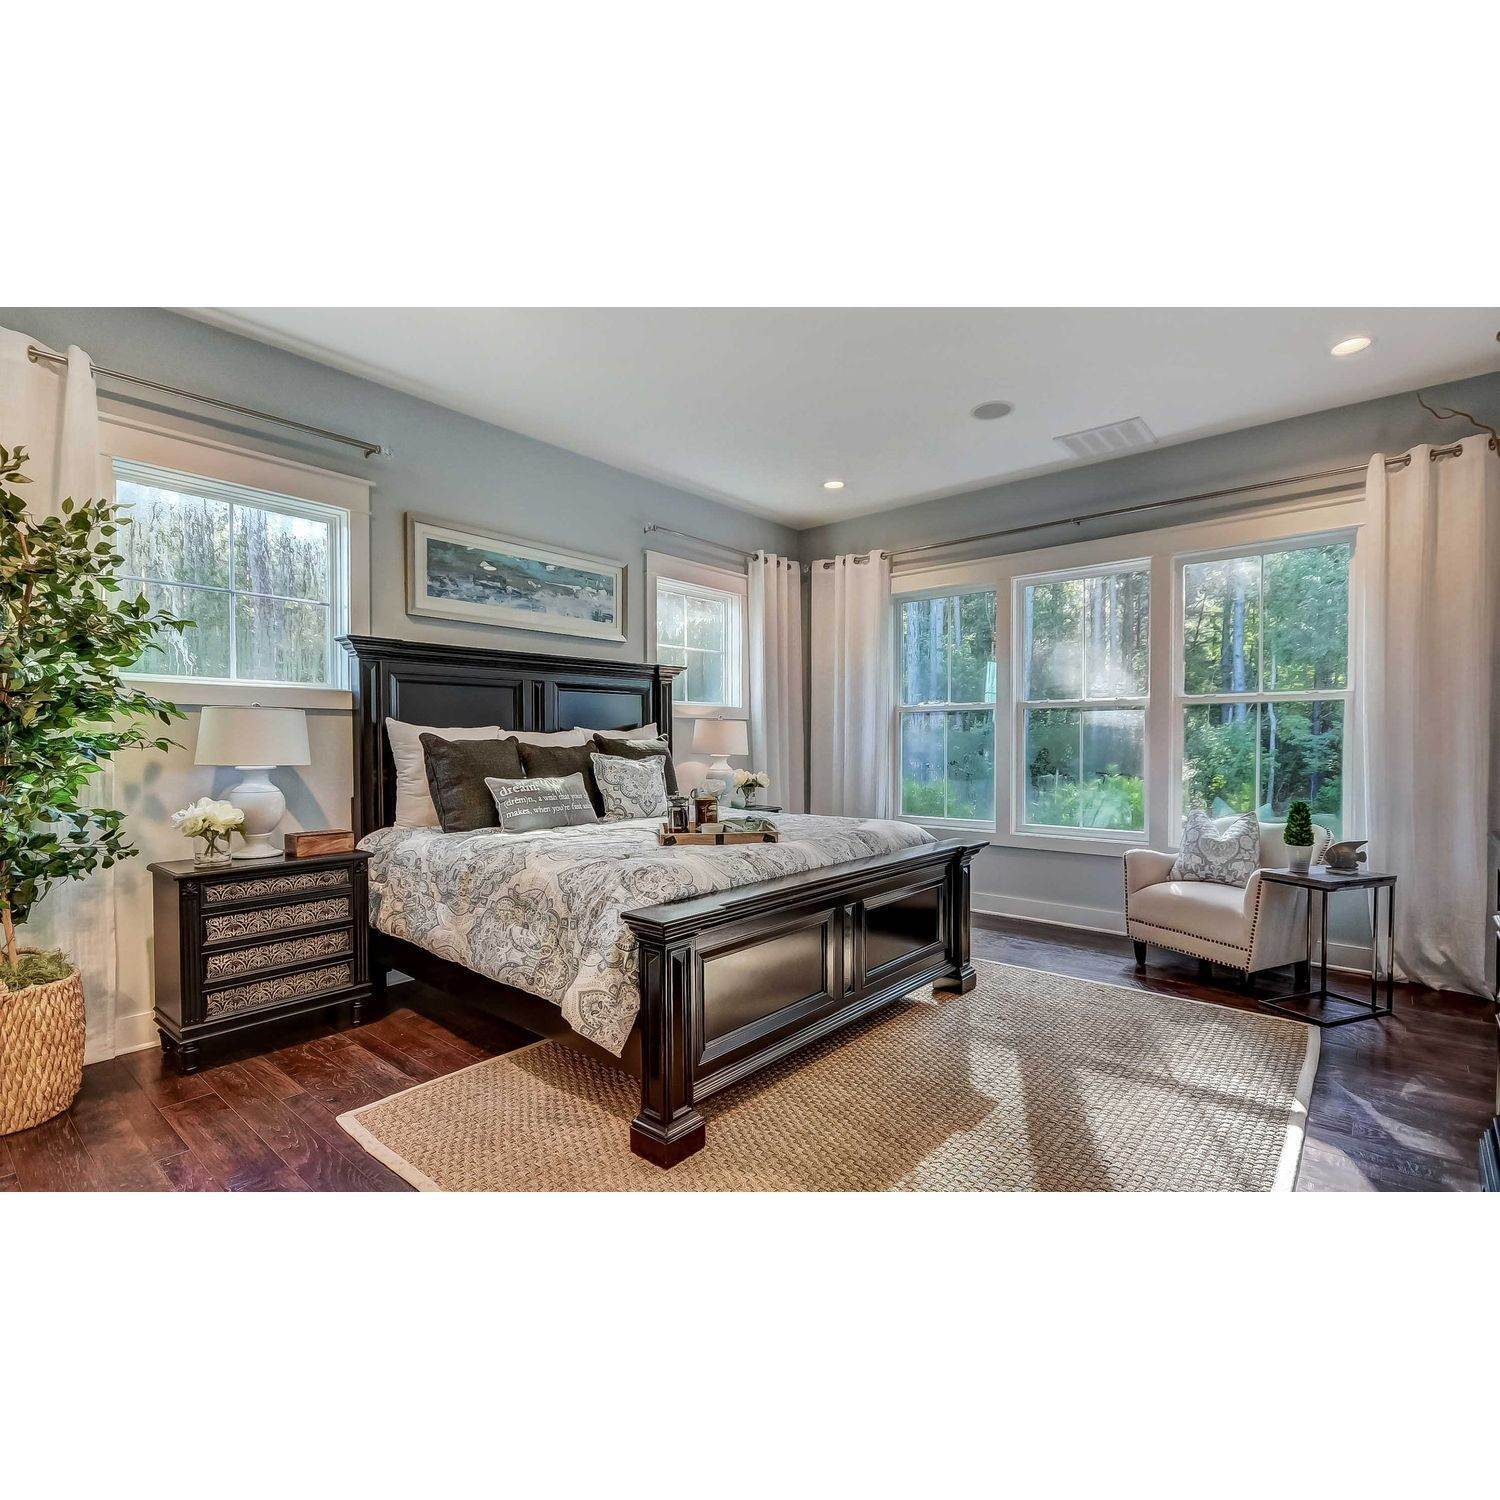 25. Single Family for Sale at K. Hovnanian's® Four Seasons At Kent Island - Sing 203 Bayberry Drive, Chester, MD 21619